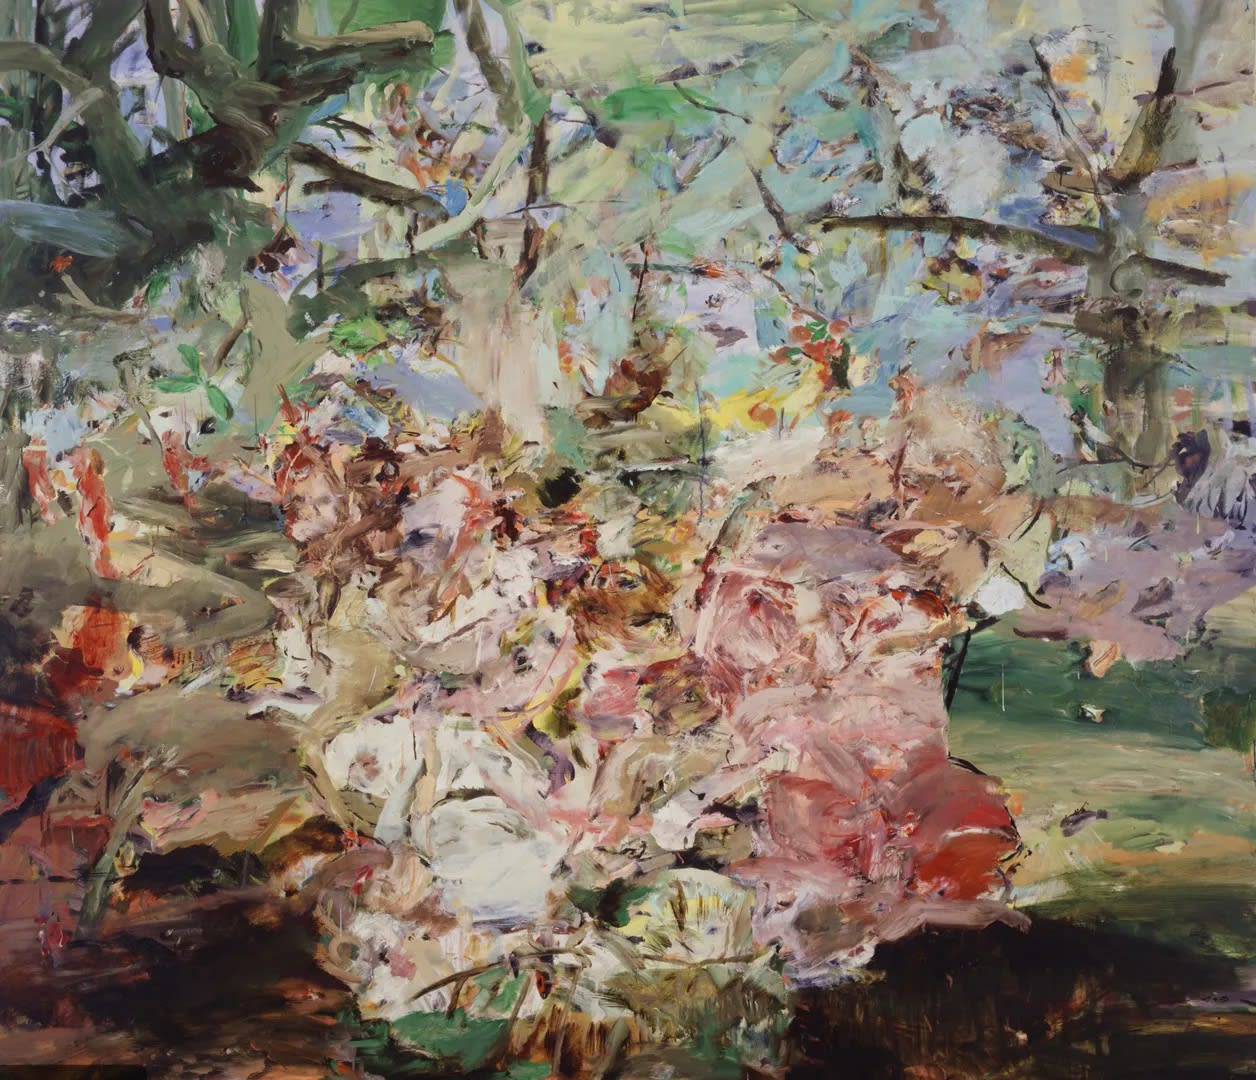 Cecily Brown artwork is the property of The Broad museum in Los Angeles. The contemporary female artist, represented by Gagosian Gallery, is the 4th best selling artist at auction in 2023.